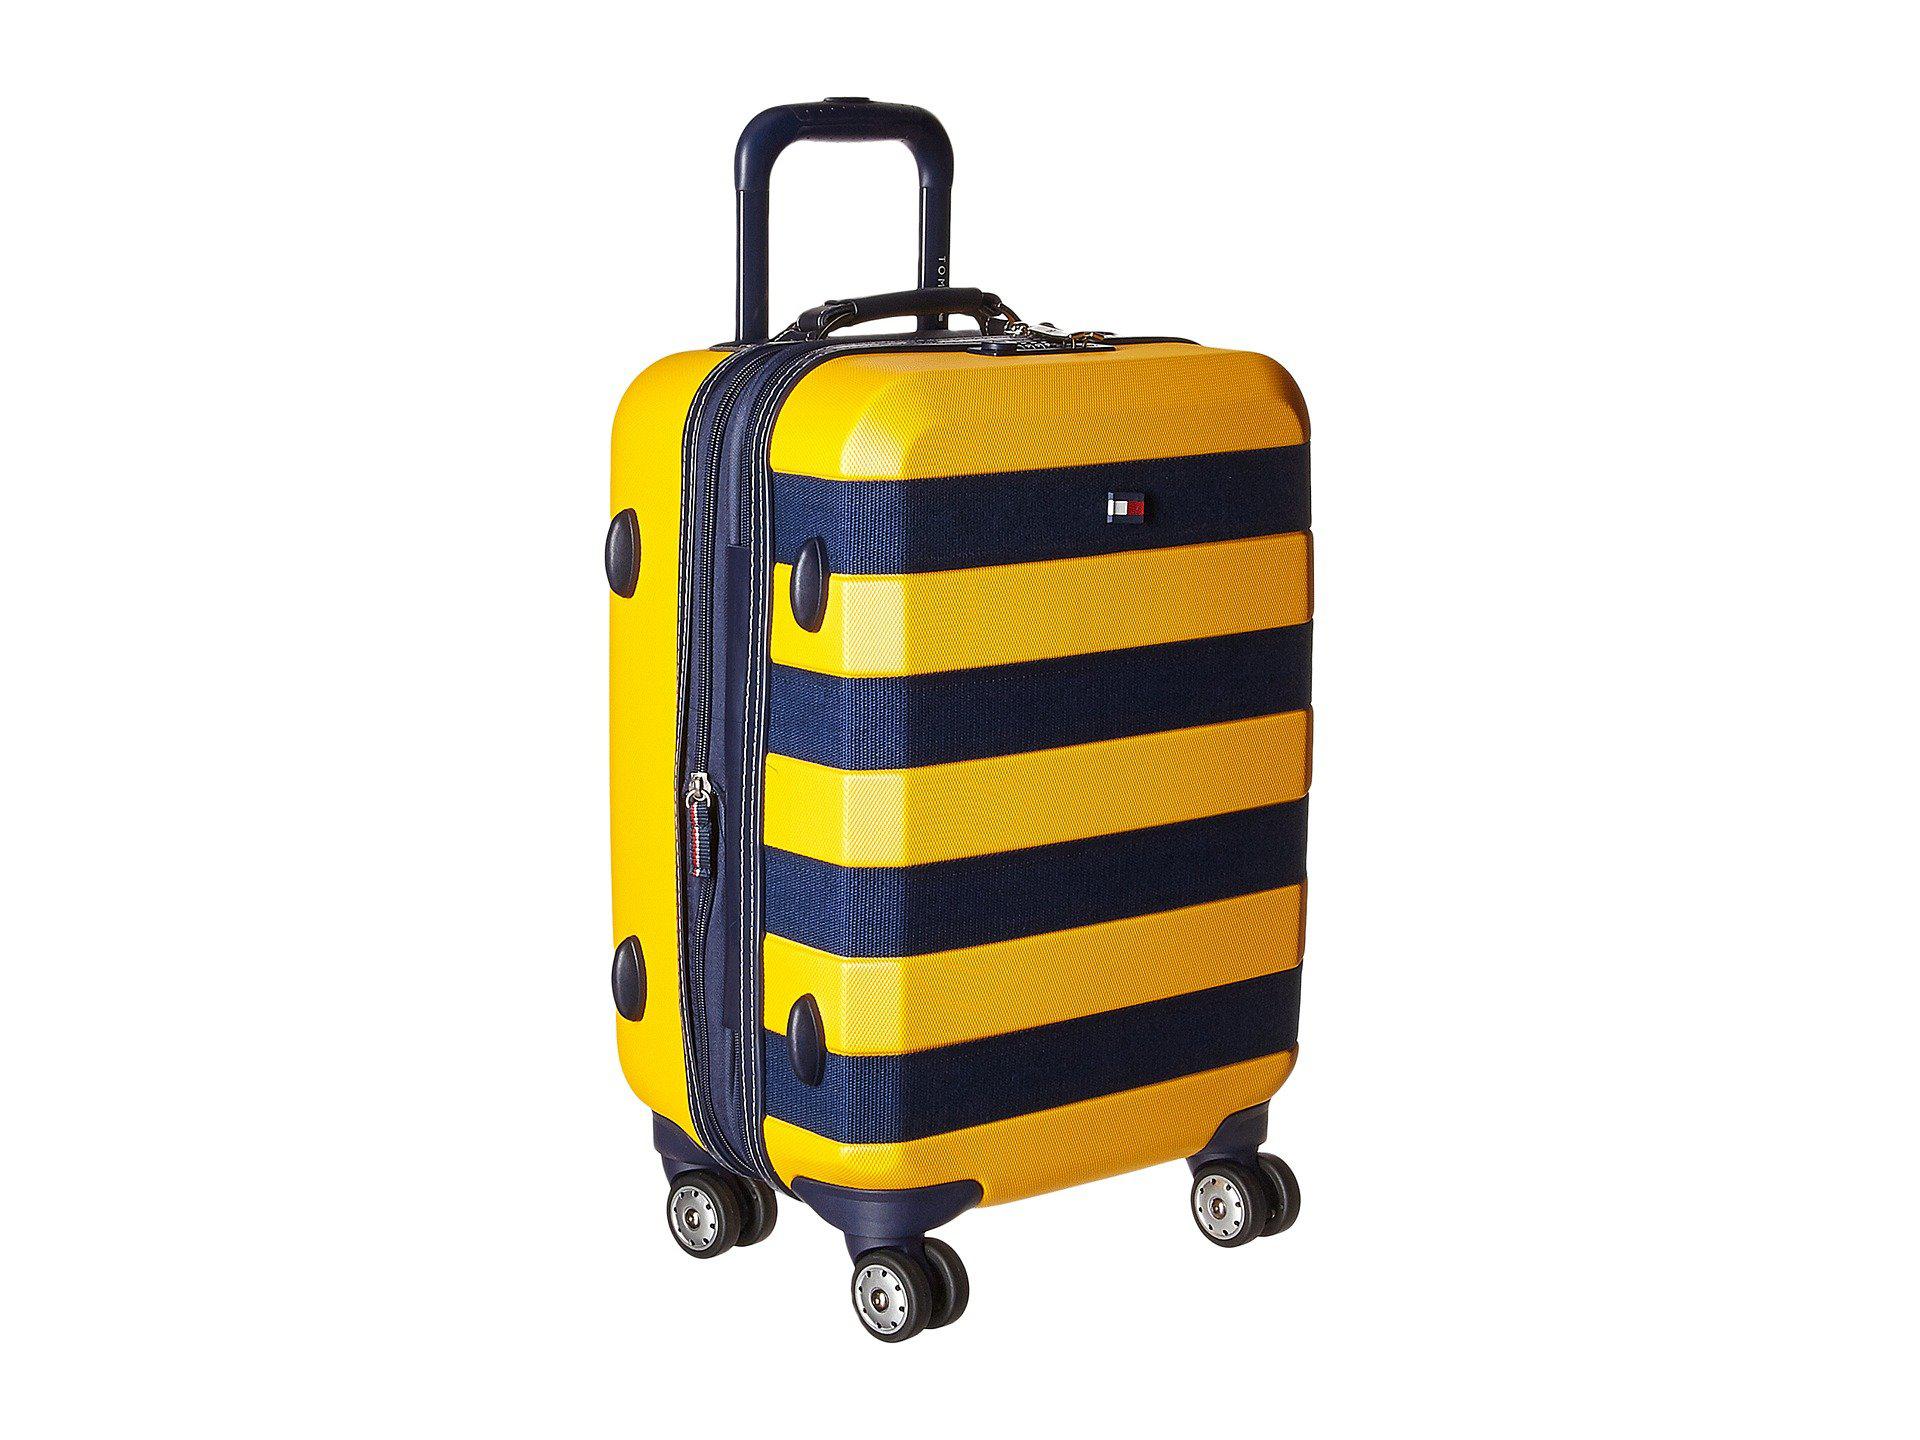 tommy hilfiger yellow suitcase